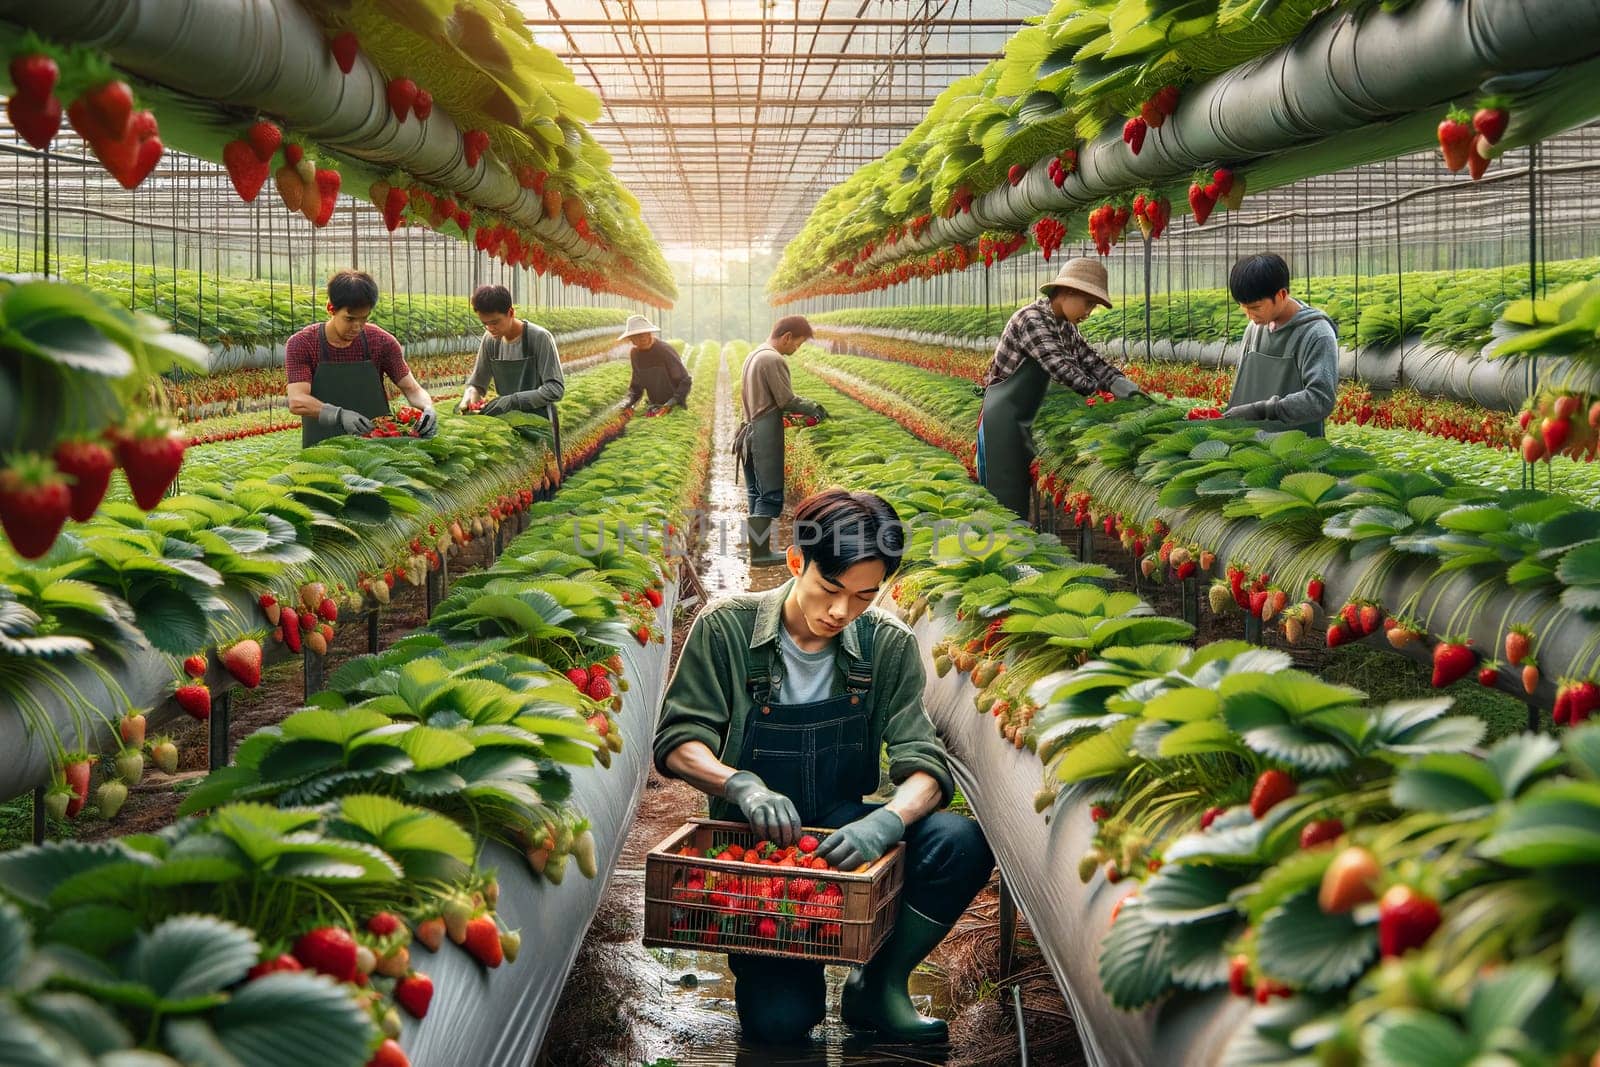 workers harvesting strawberries in a vertical farm greenhouse by Annado